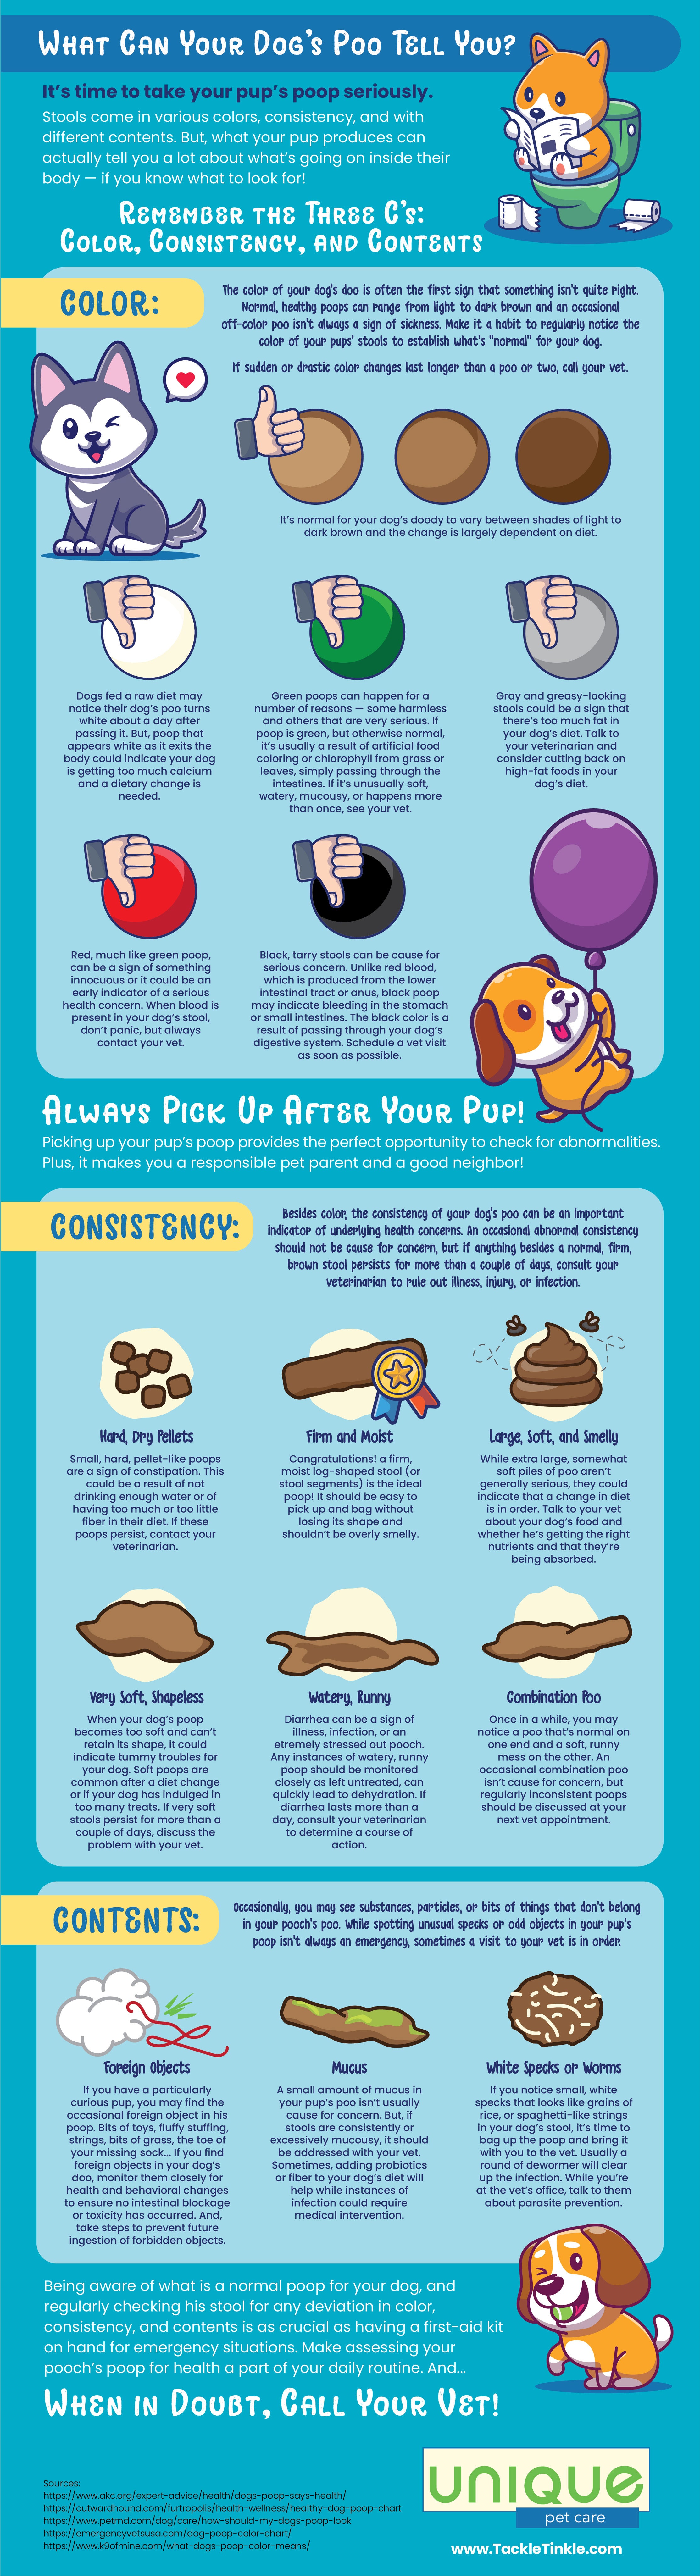 infographic titled what can your dog's poo tell you? shows what different colors of dog poop mean